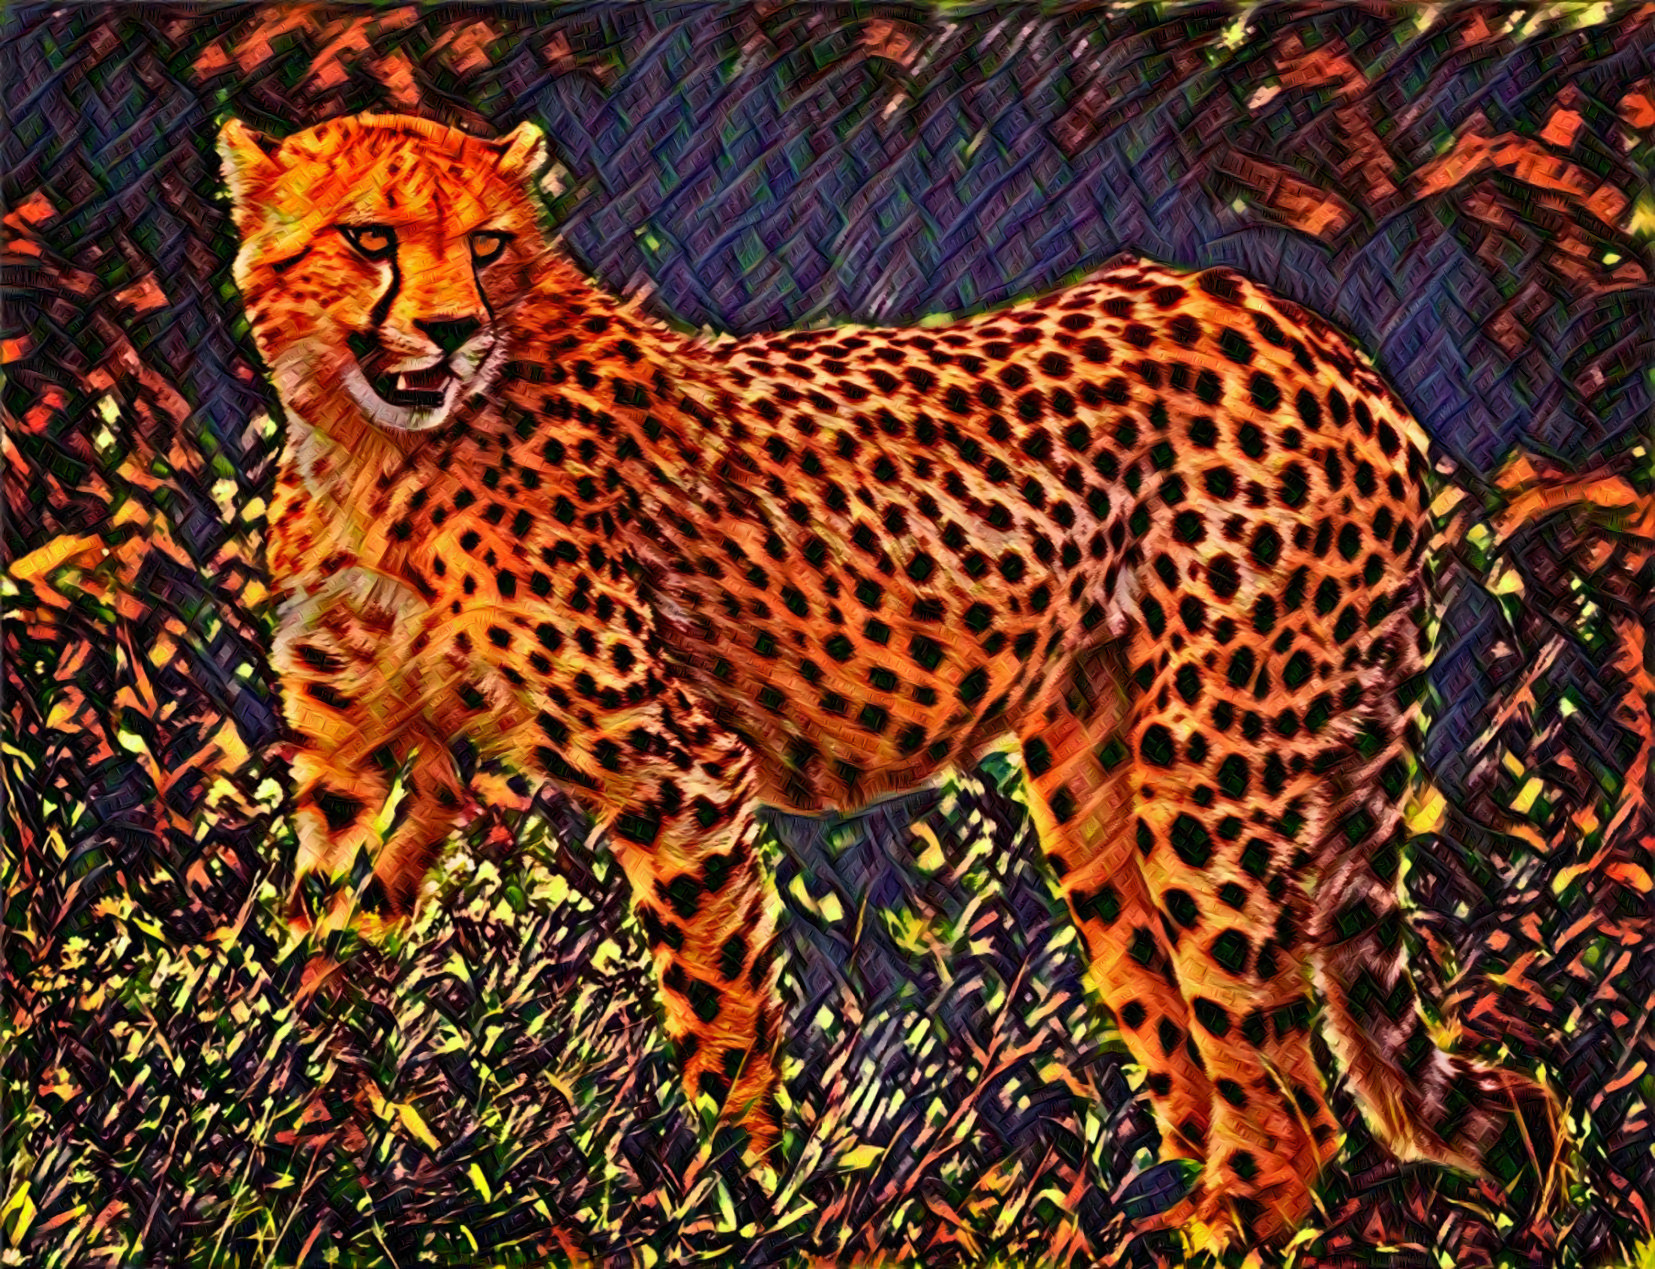 Speedy Daytime Predator ... Cheetah [Big cat, runs 0 to 60 mi/hr in 3 Sec., Prey includes antelope and hares, runs after and knocks down prey. https://www.nationalgeographic.com/animals/mammals/c/cheetah/] [  CC BY-SA 4.0, Charles J Sharp,  https://commons